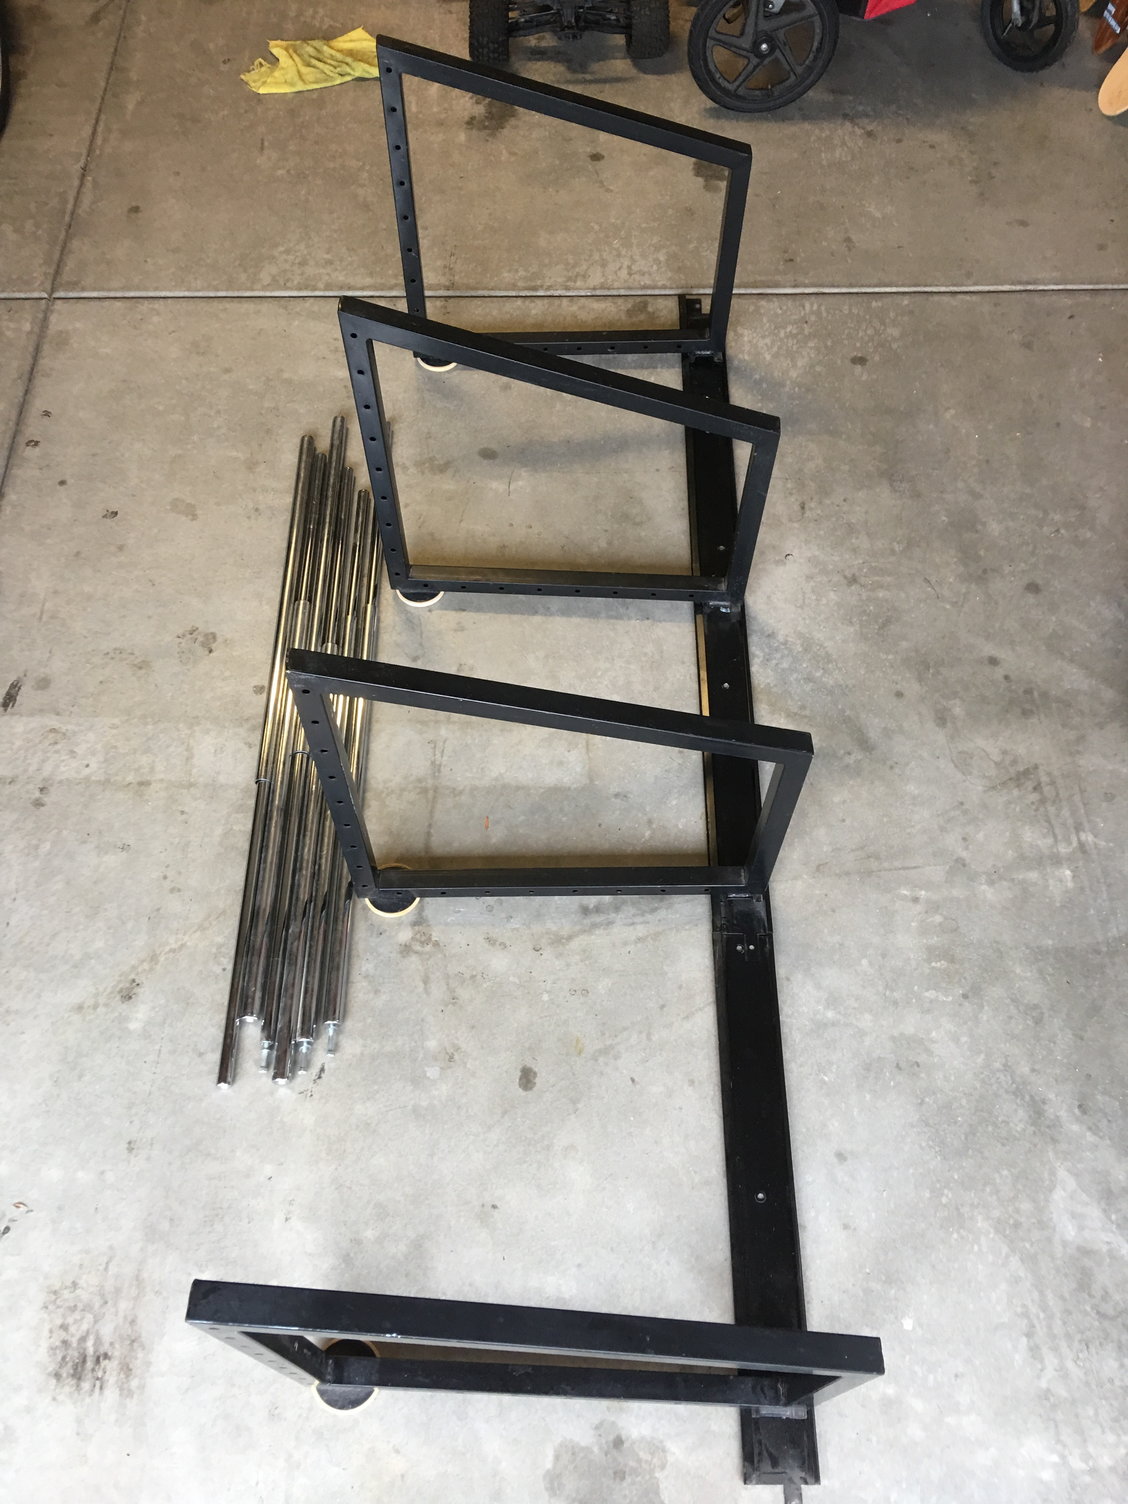 Wheels and Tires/Axles - Wheel & Tire racks - Used - All Years Any Make All Models - Rancho Mission Viejo, CA 92694, United States